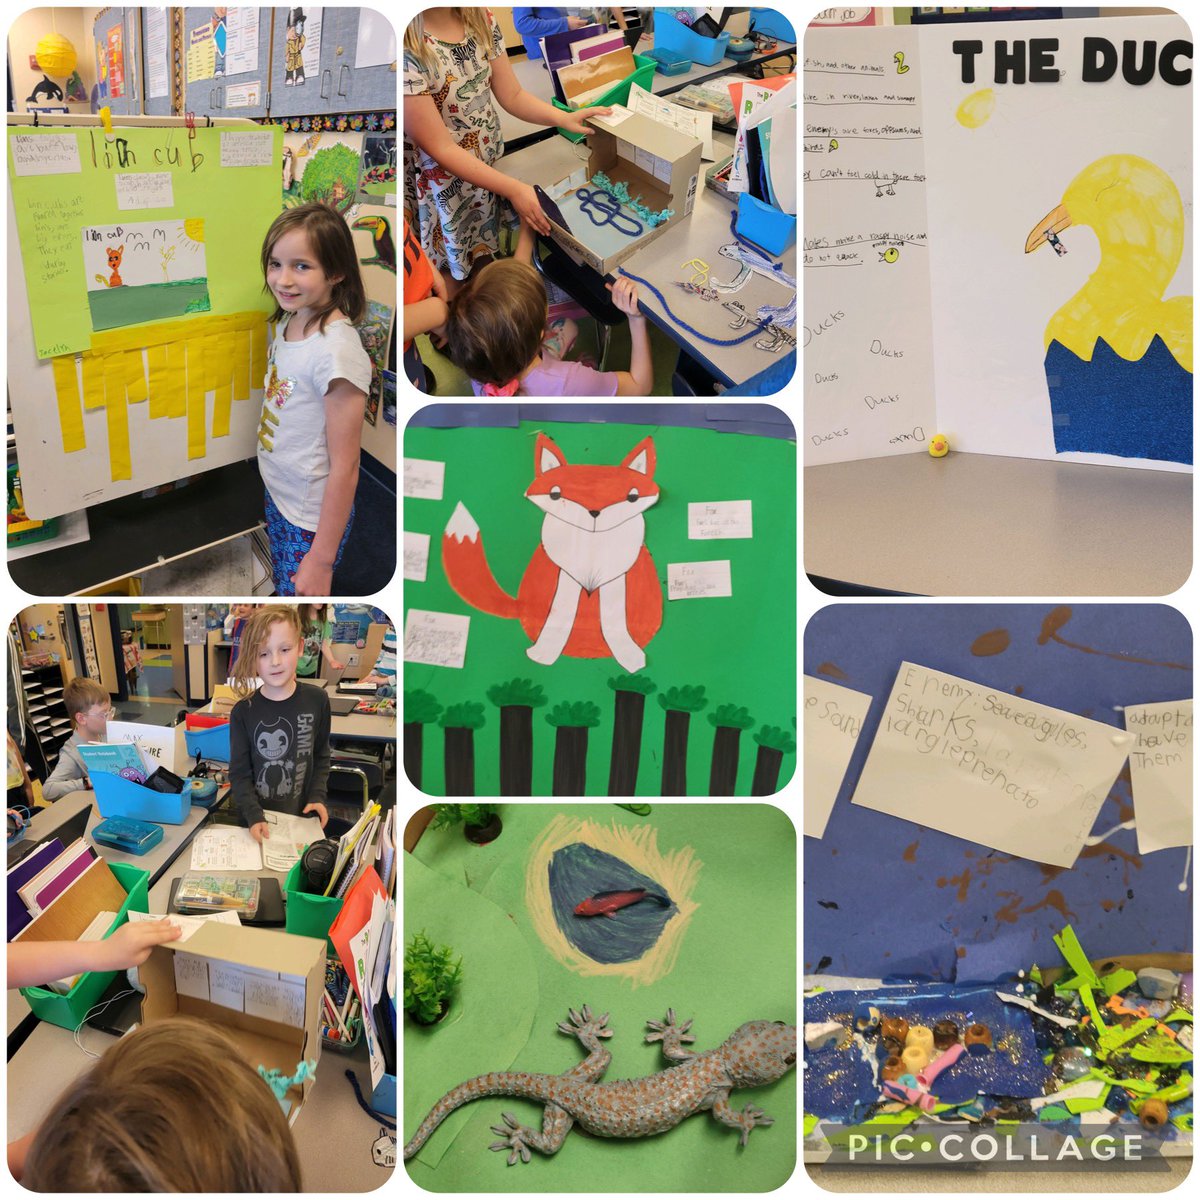 Grindstone second graders presented animal projects today! Wow! Incredible work researching and creating dioramas of your animals habitats! @BereaCSD @GrindstoneBCSD #BeATitan